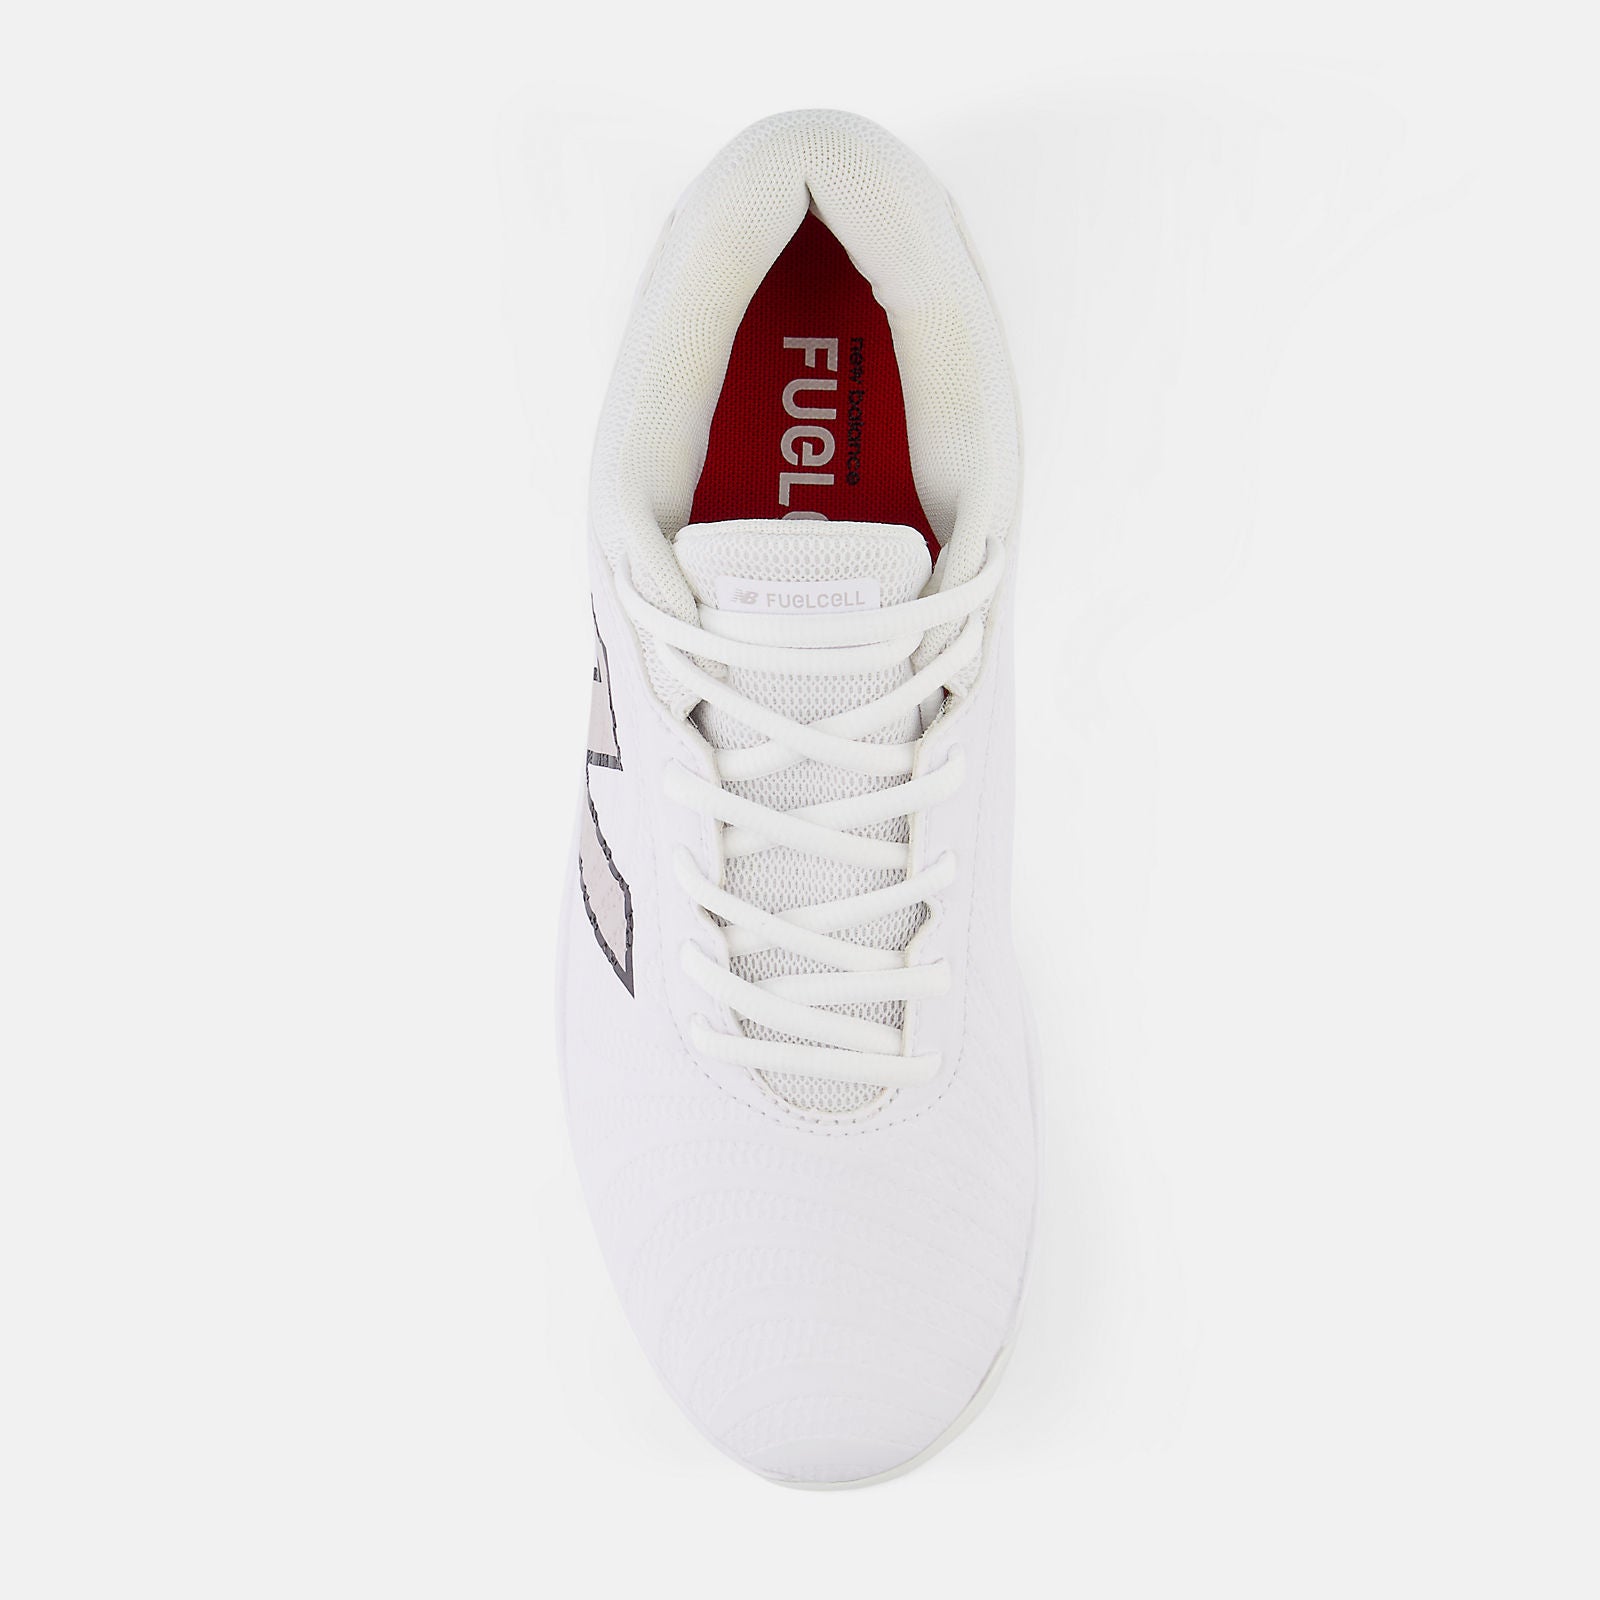 New Balance SPFUSEW4 Women's Molded Cleats: White